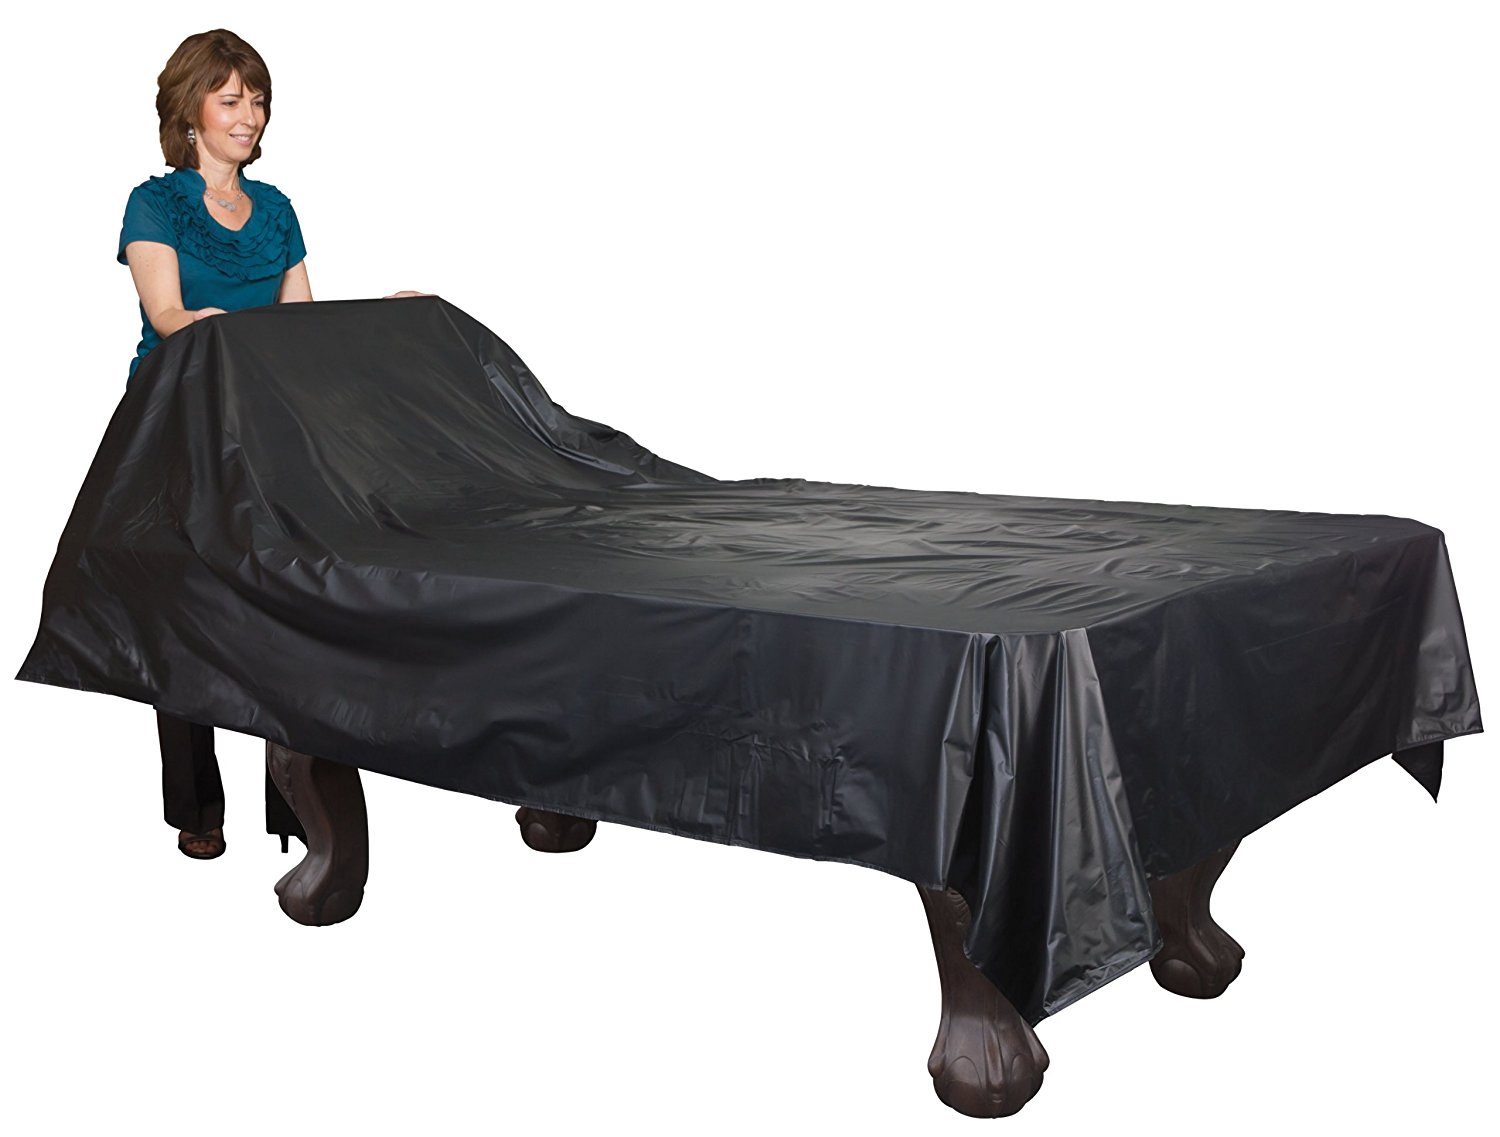 EastPoint Sports Billiard Table Cover, Large